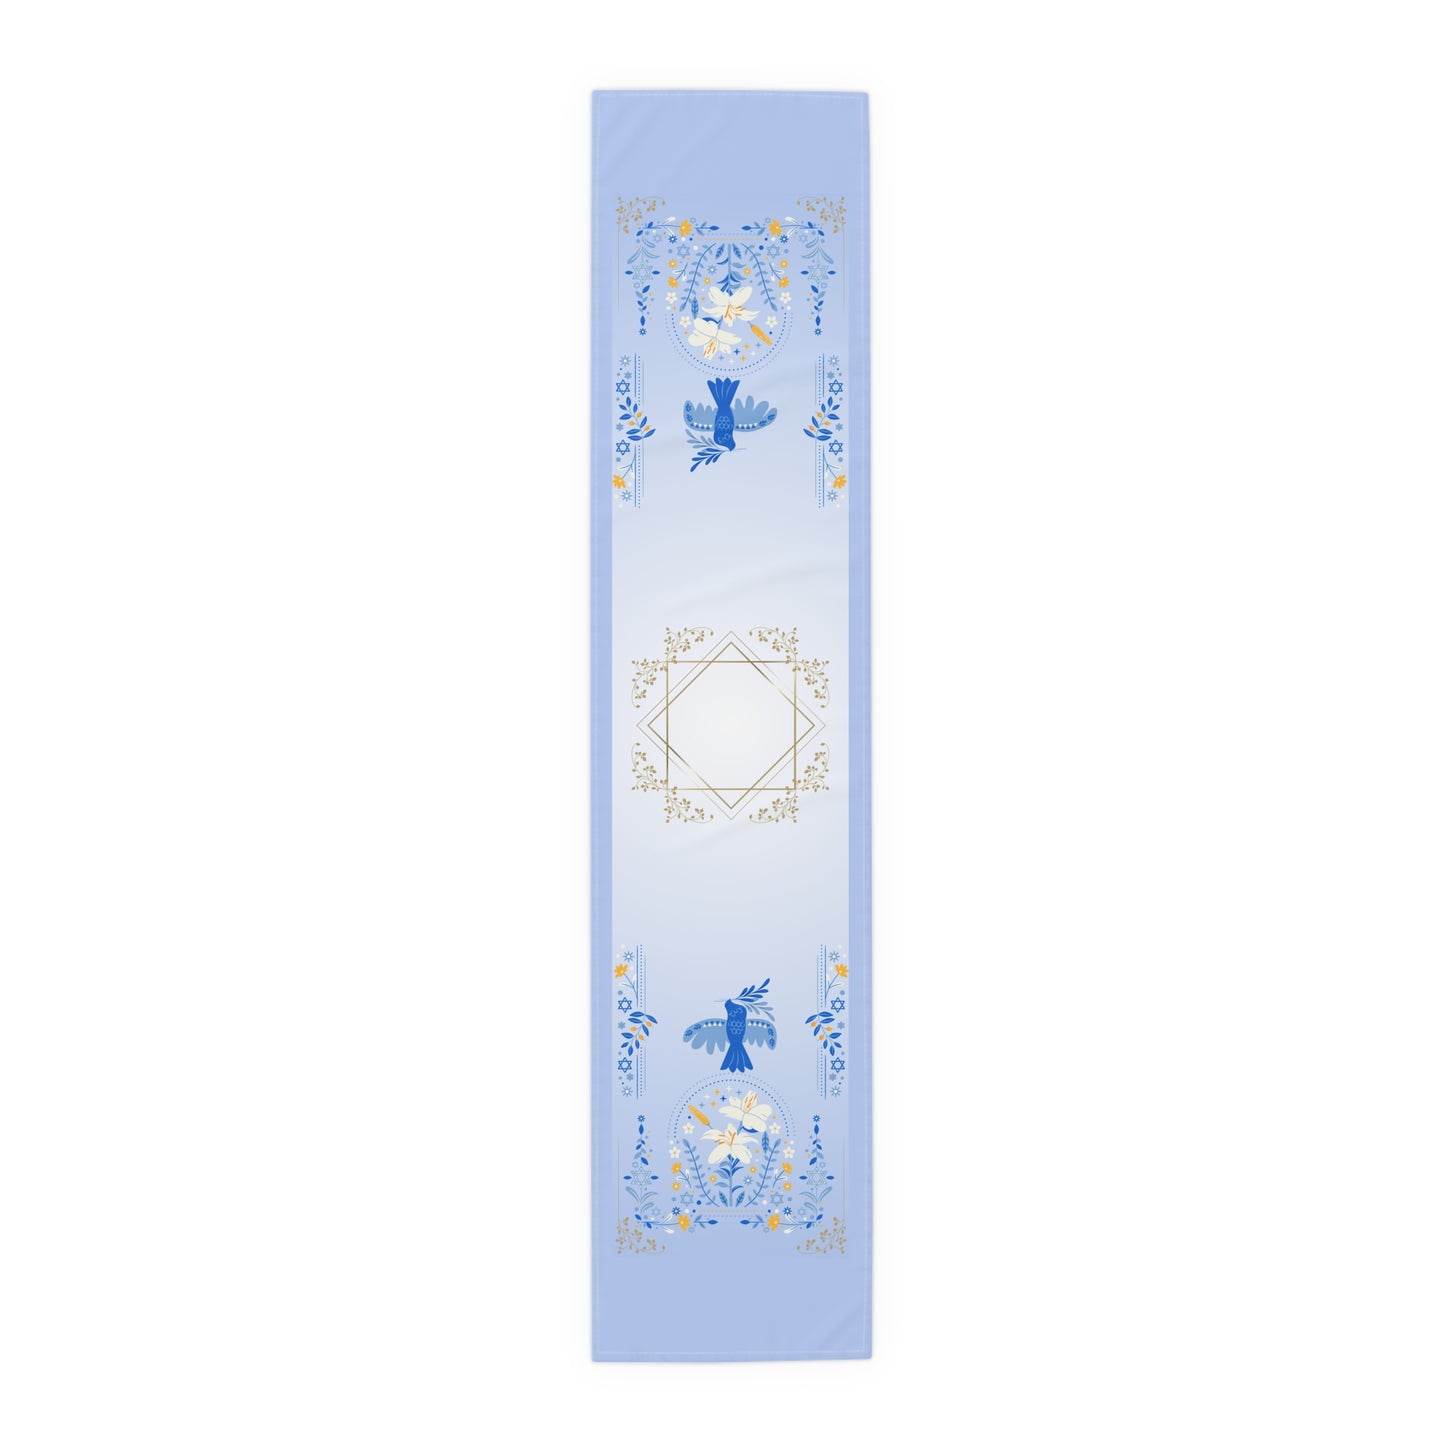 Peaceful Words | Jewish Inspired | Table Runner (Cotton, Poly)